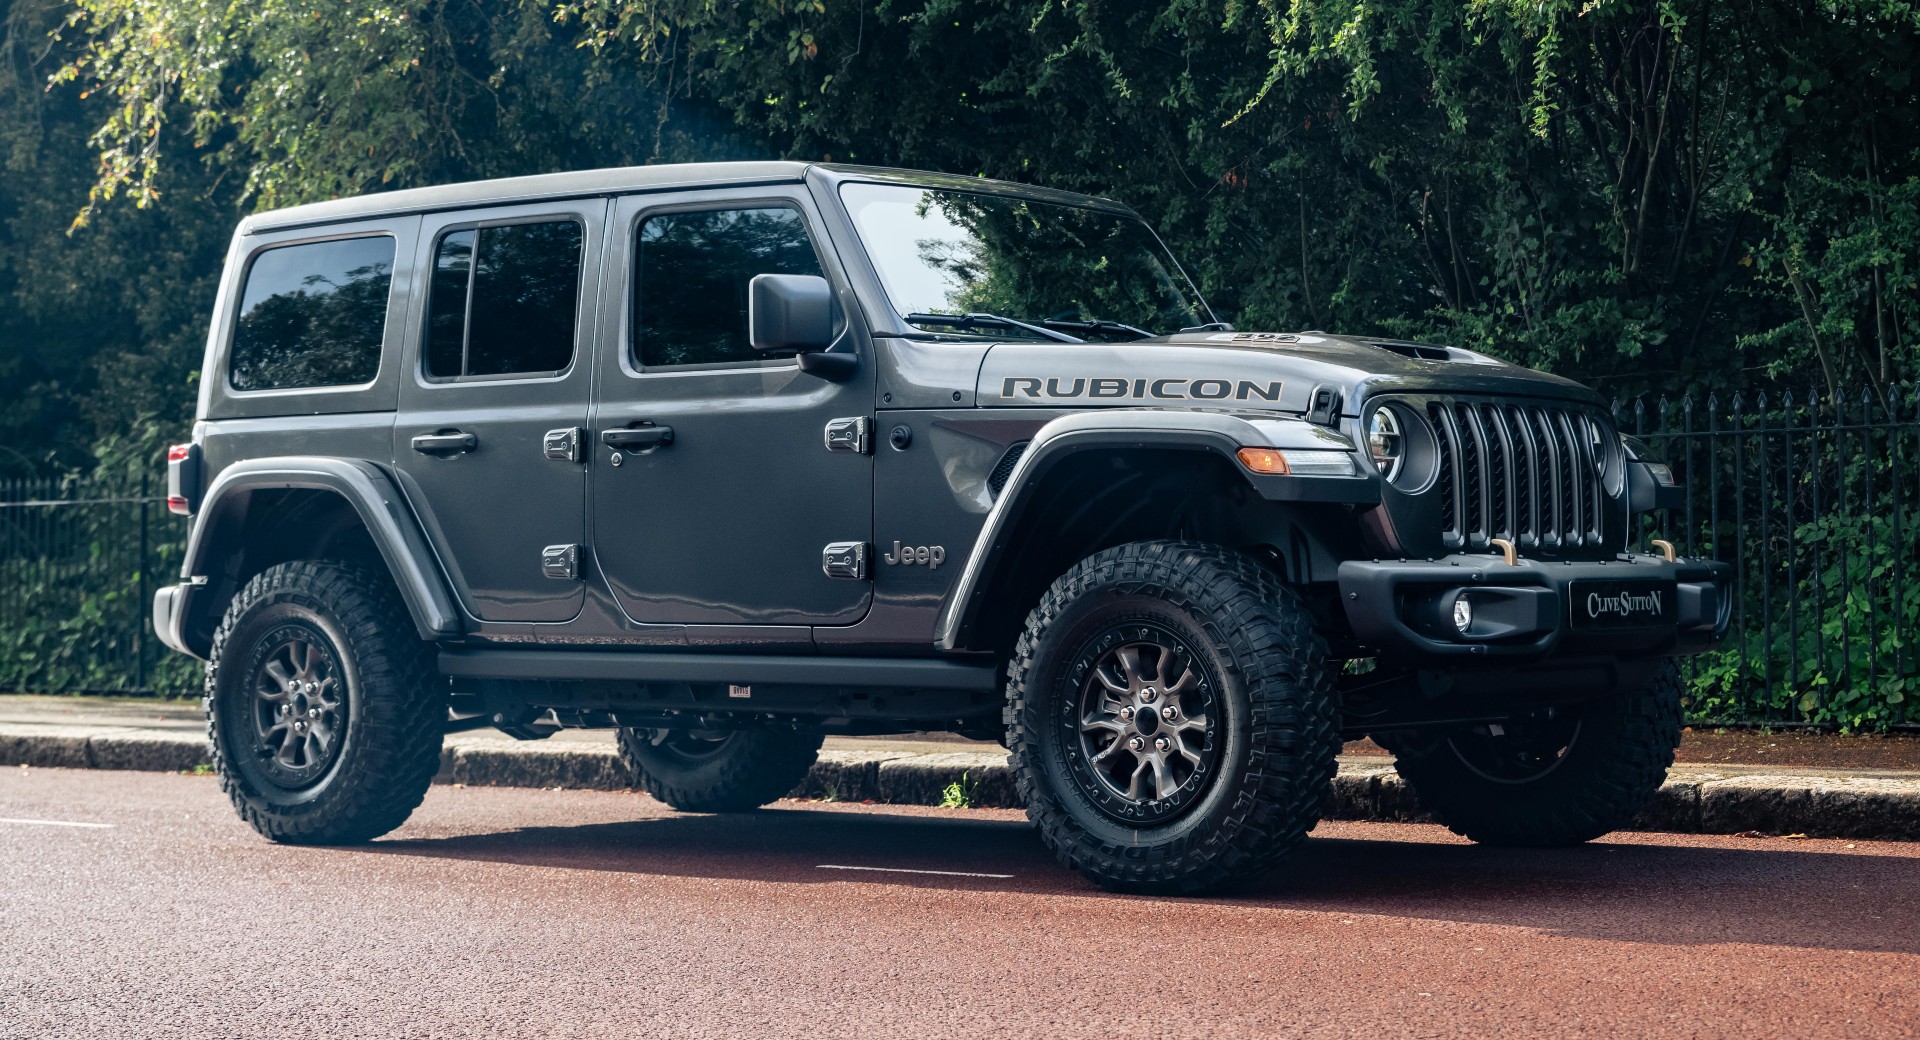 You Can Buy The Jeep Wrangler Rubicon 392 In The UK, But It'll Cost You  £105,000 | Carscoops